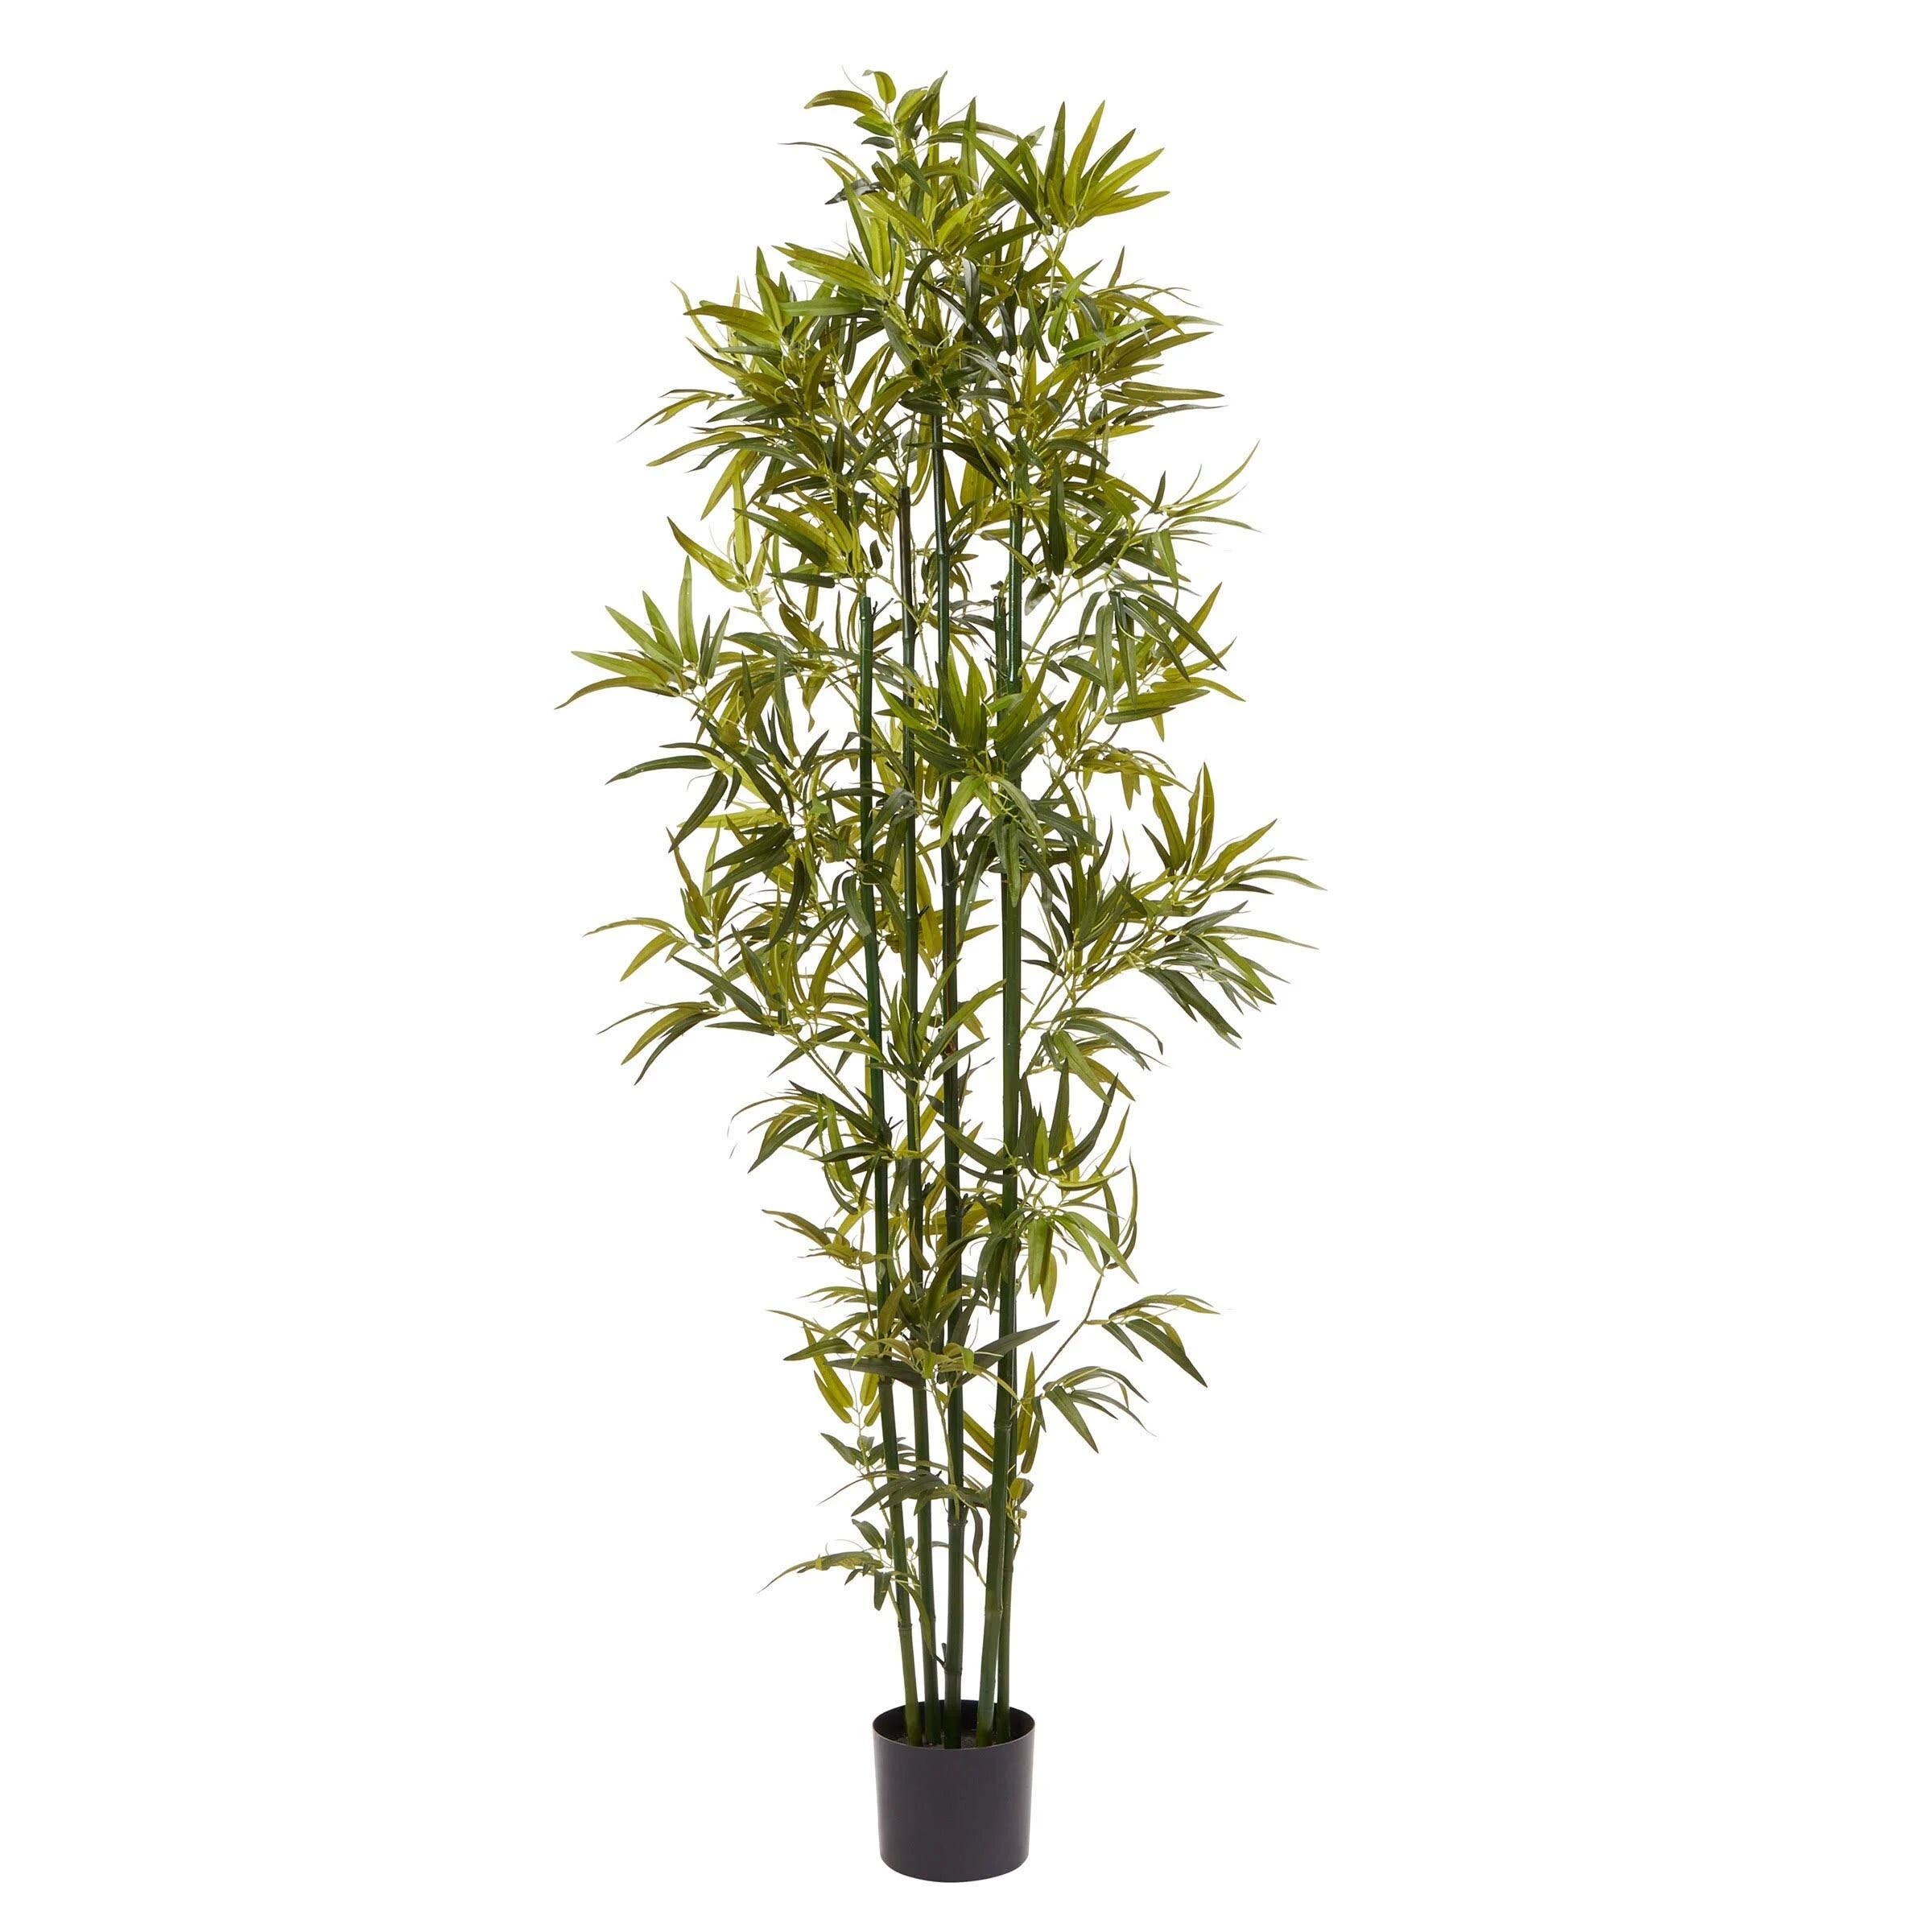 Vibrant 6 ft. Artificial Bamboo Plant for Home Decor by Pure Garden (Green Trunk) | Image